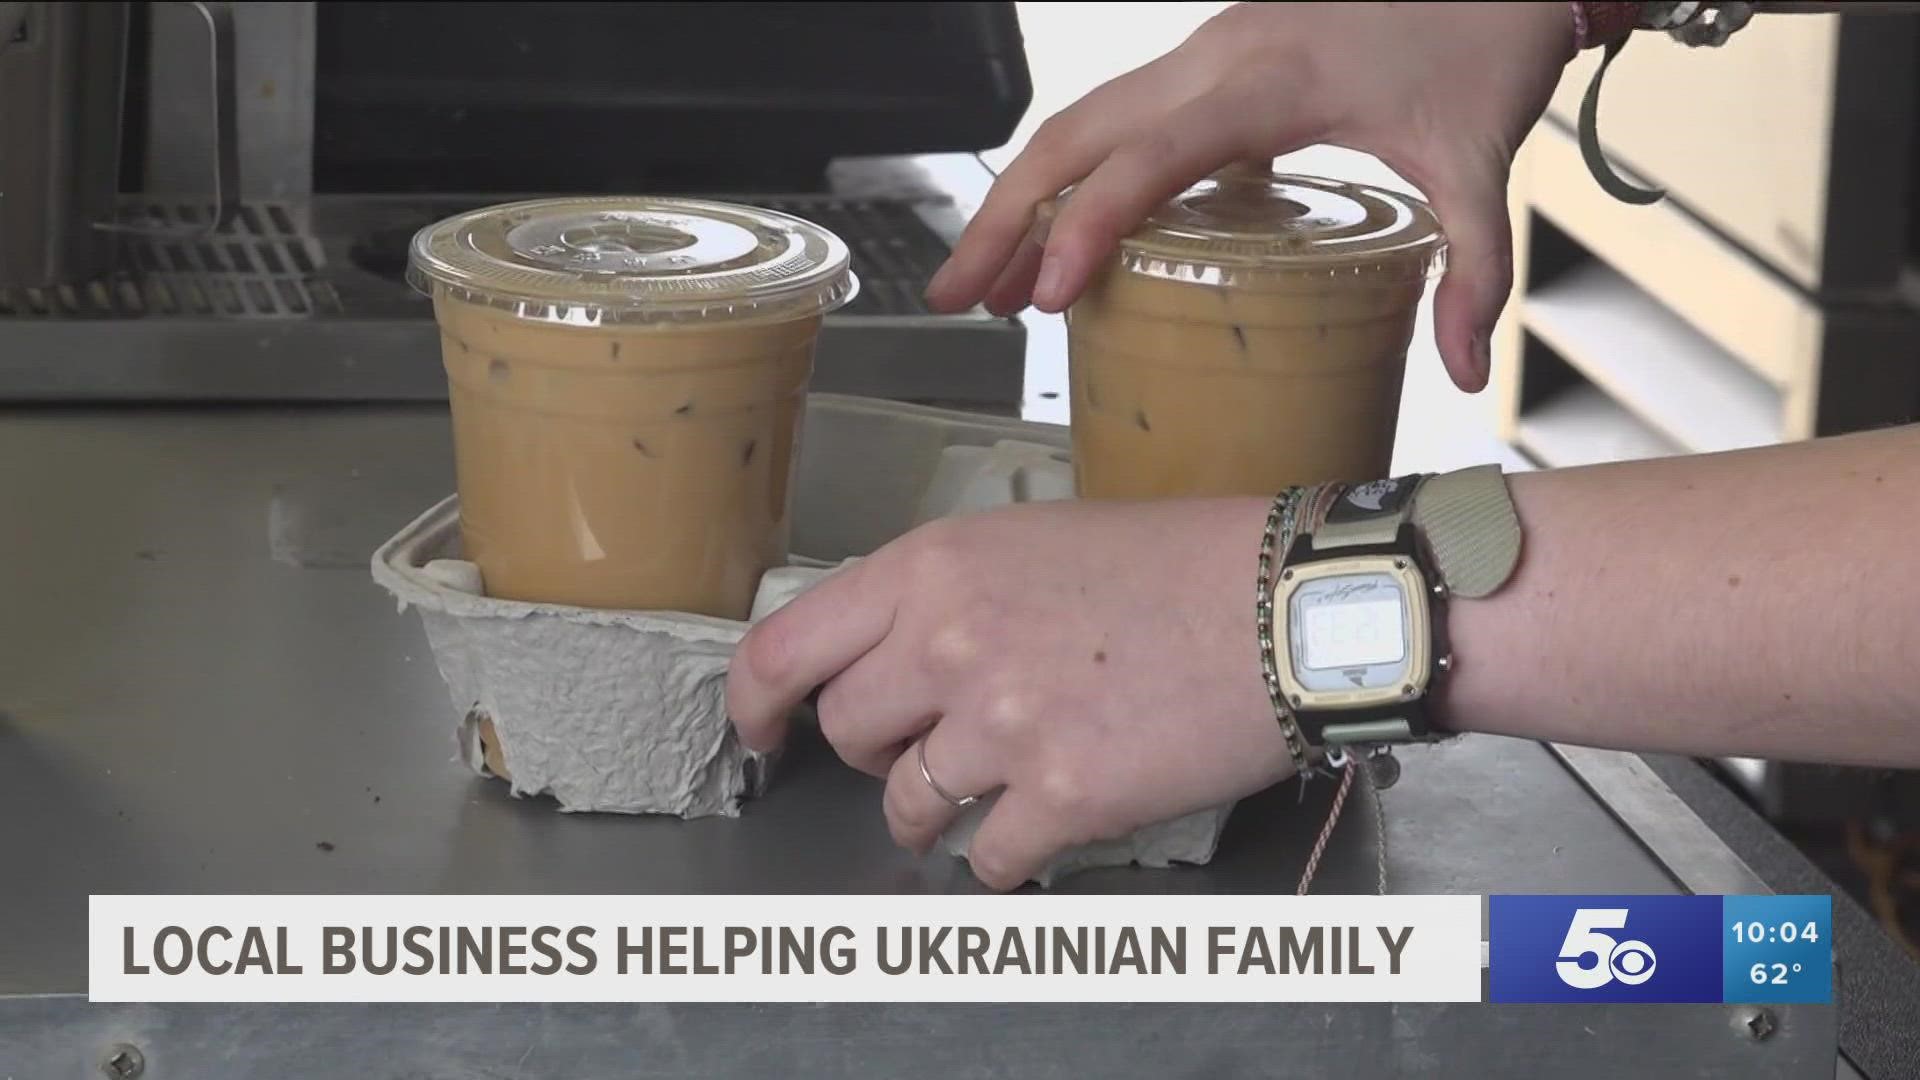 The Wicked Bean named a drink after one of their customers to help raise money for his family in Ukraine.